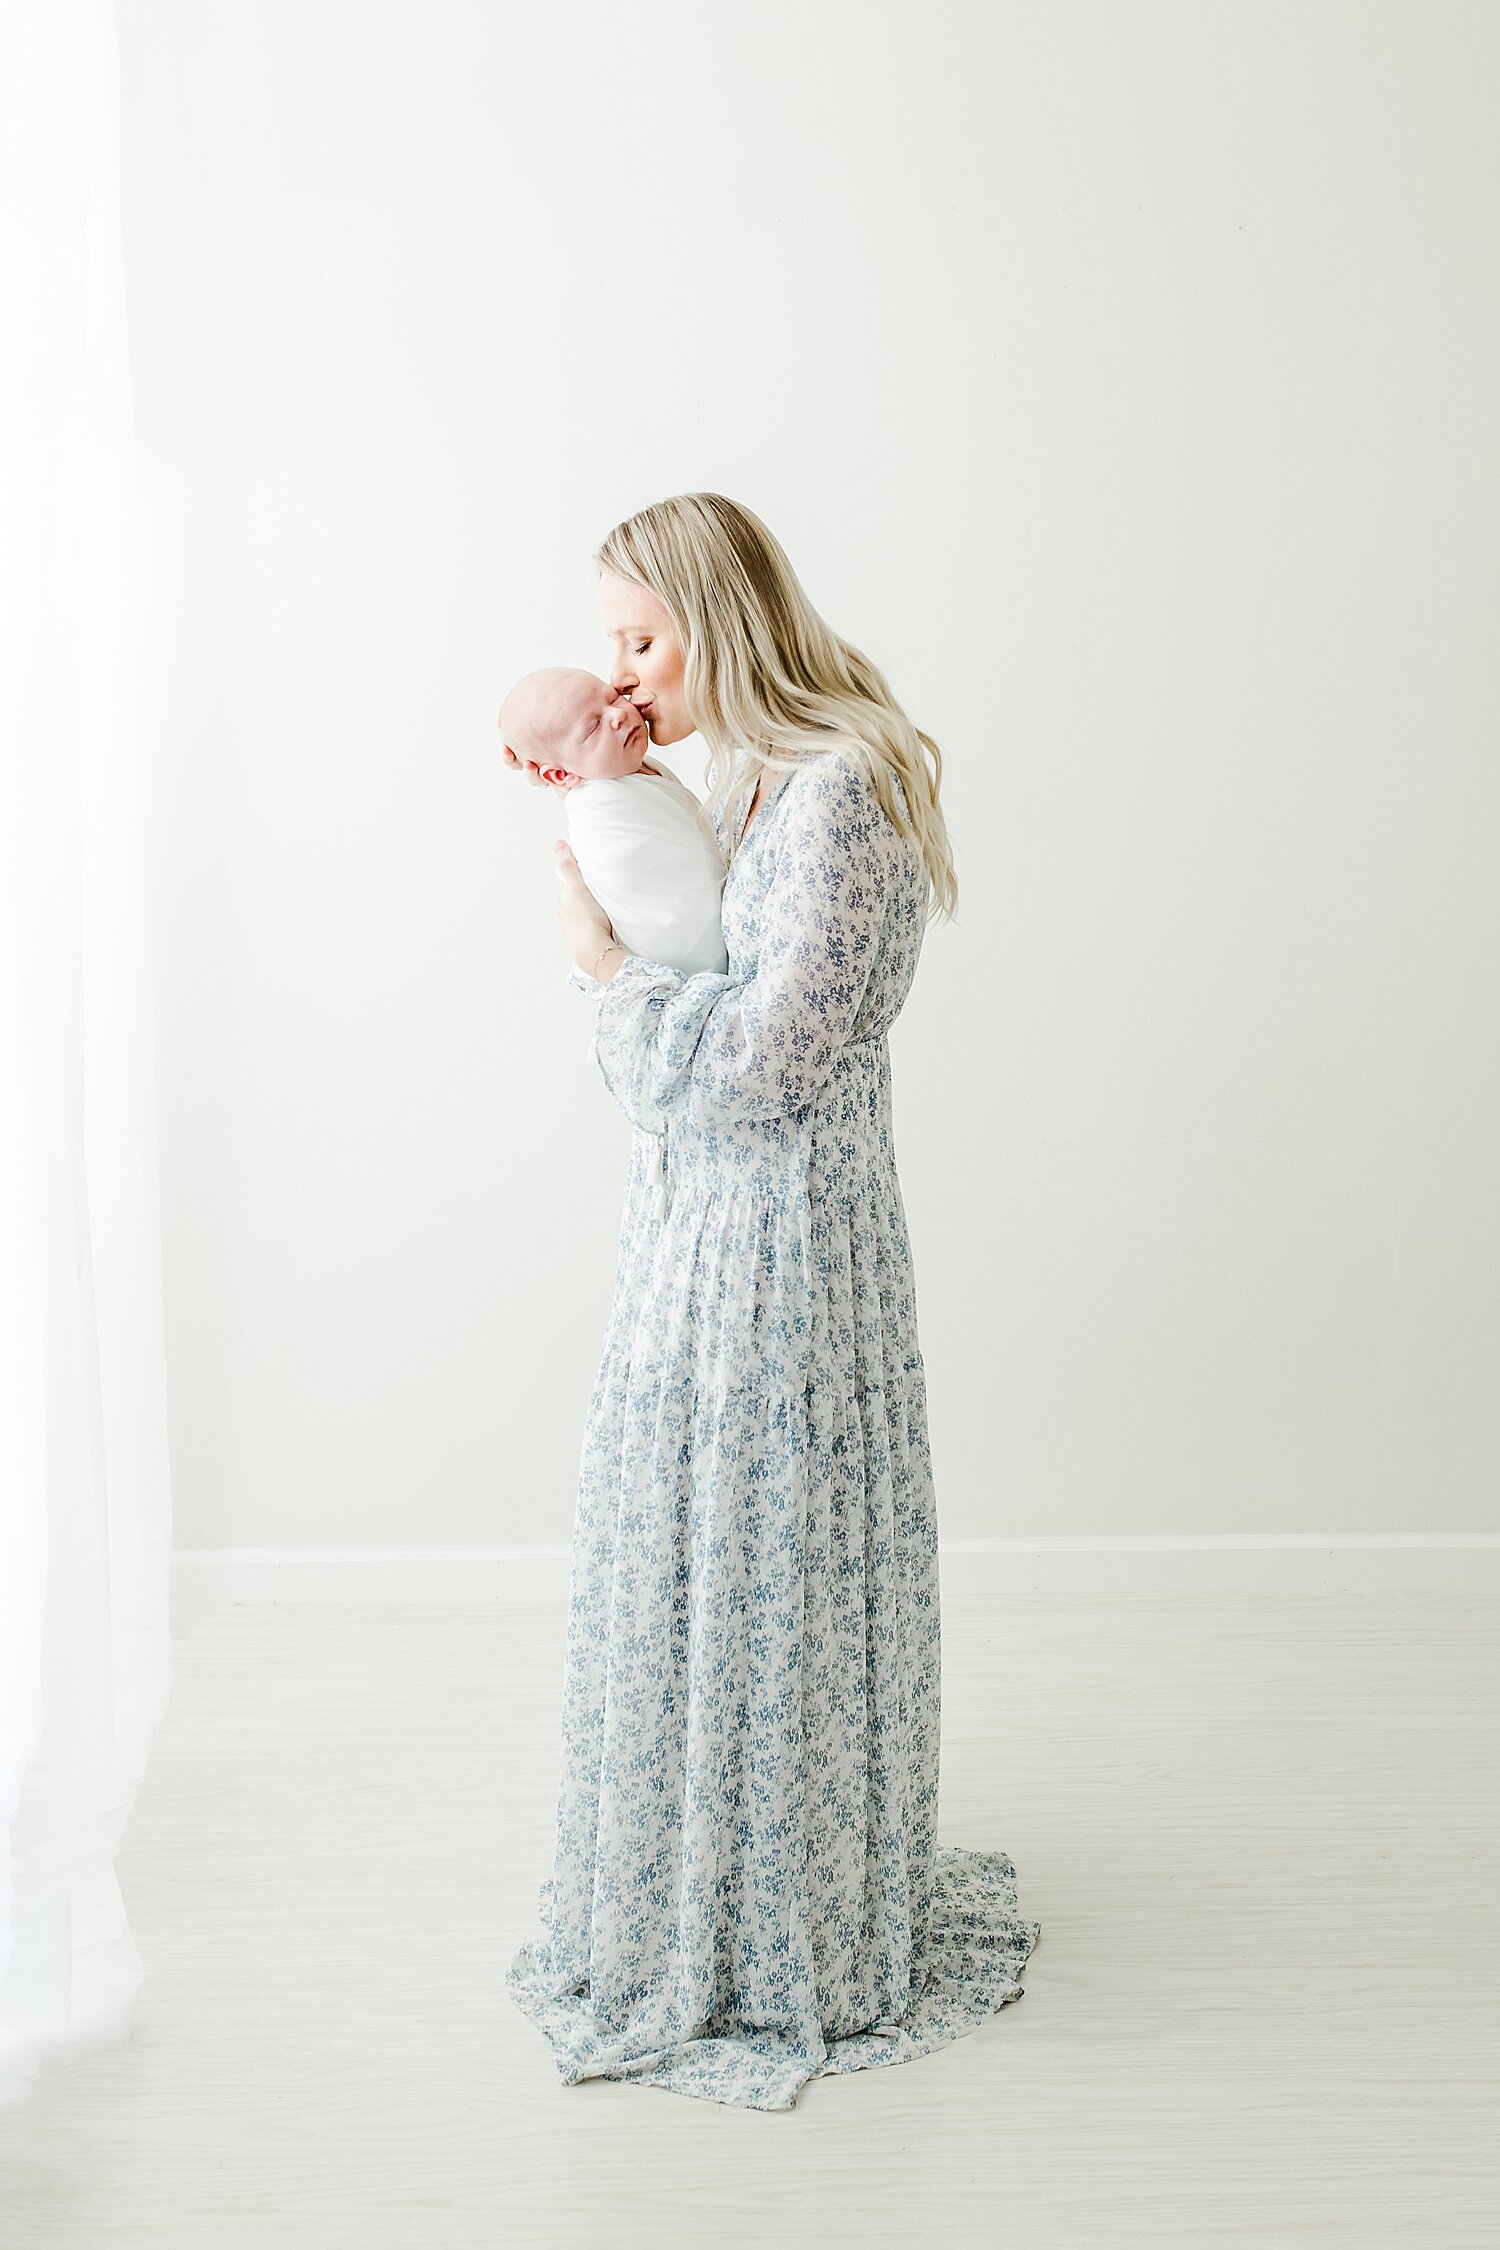 Mom wearing a long blue floral dress for newborn photoshoot. She's kissing her baby boy. Photos by Kristin Wood Photography. 